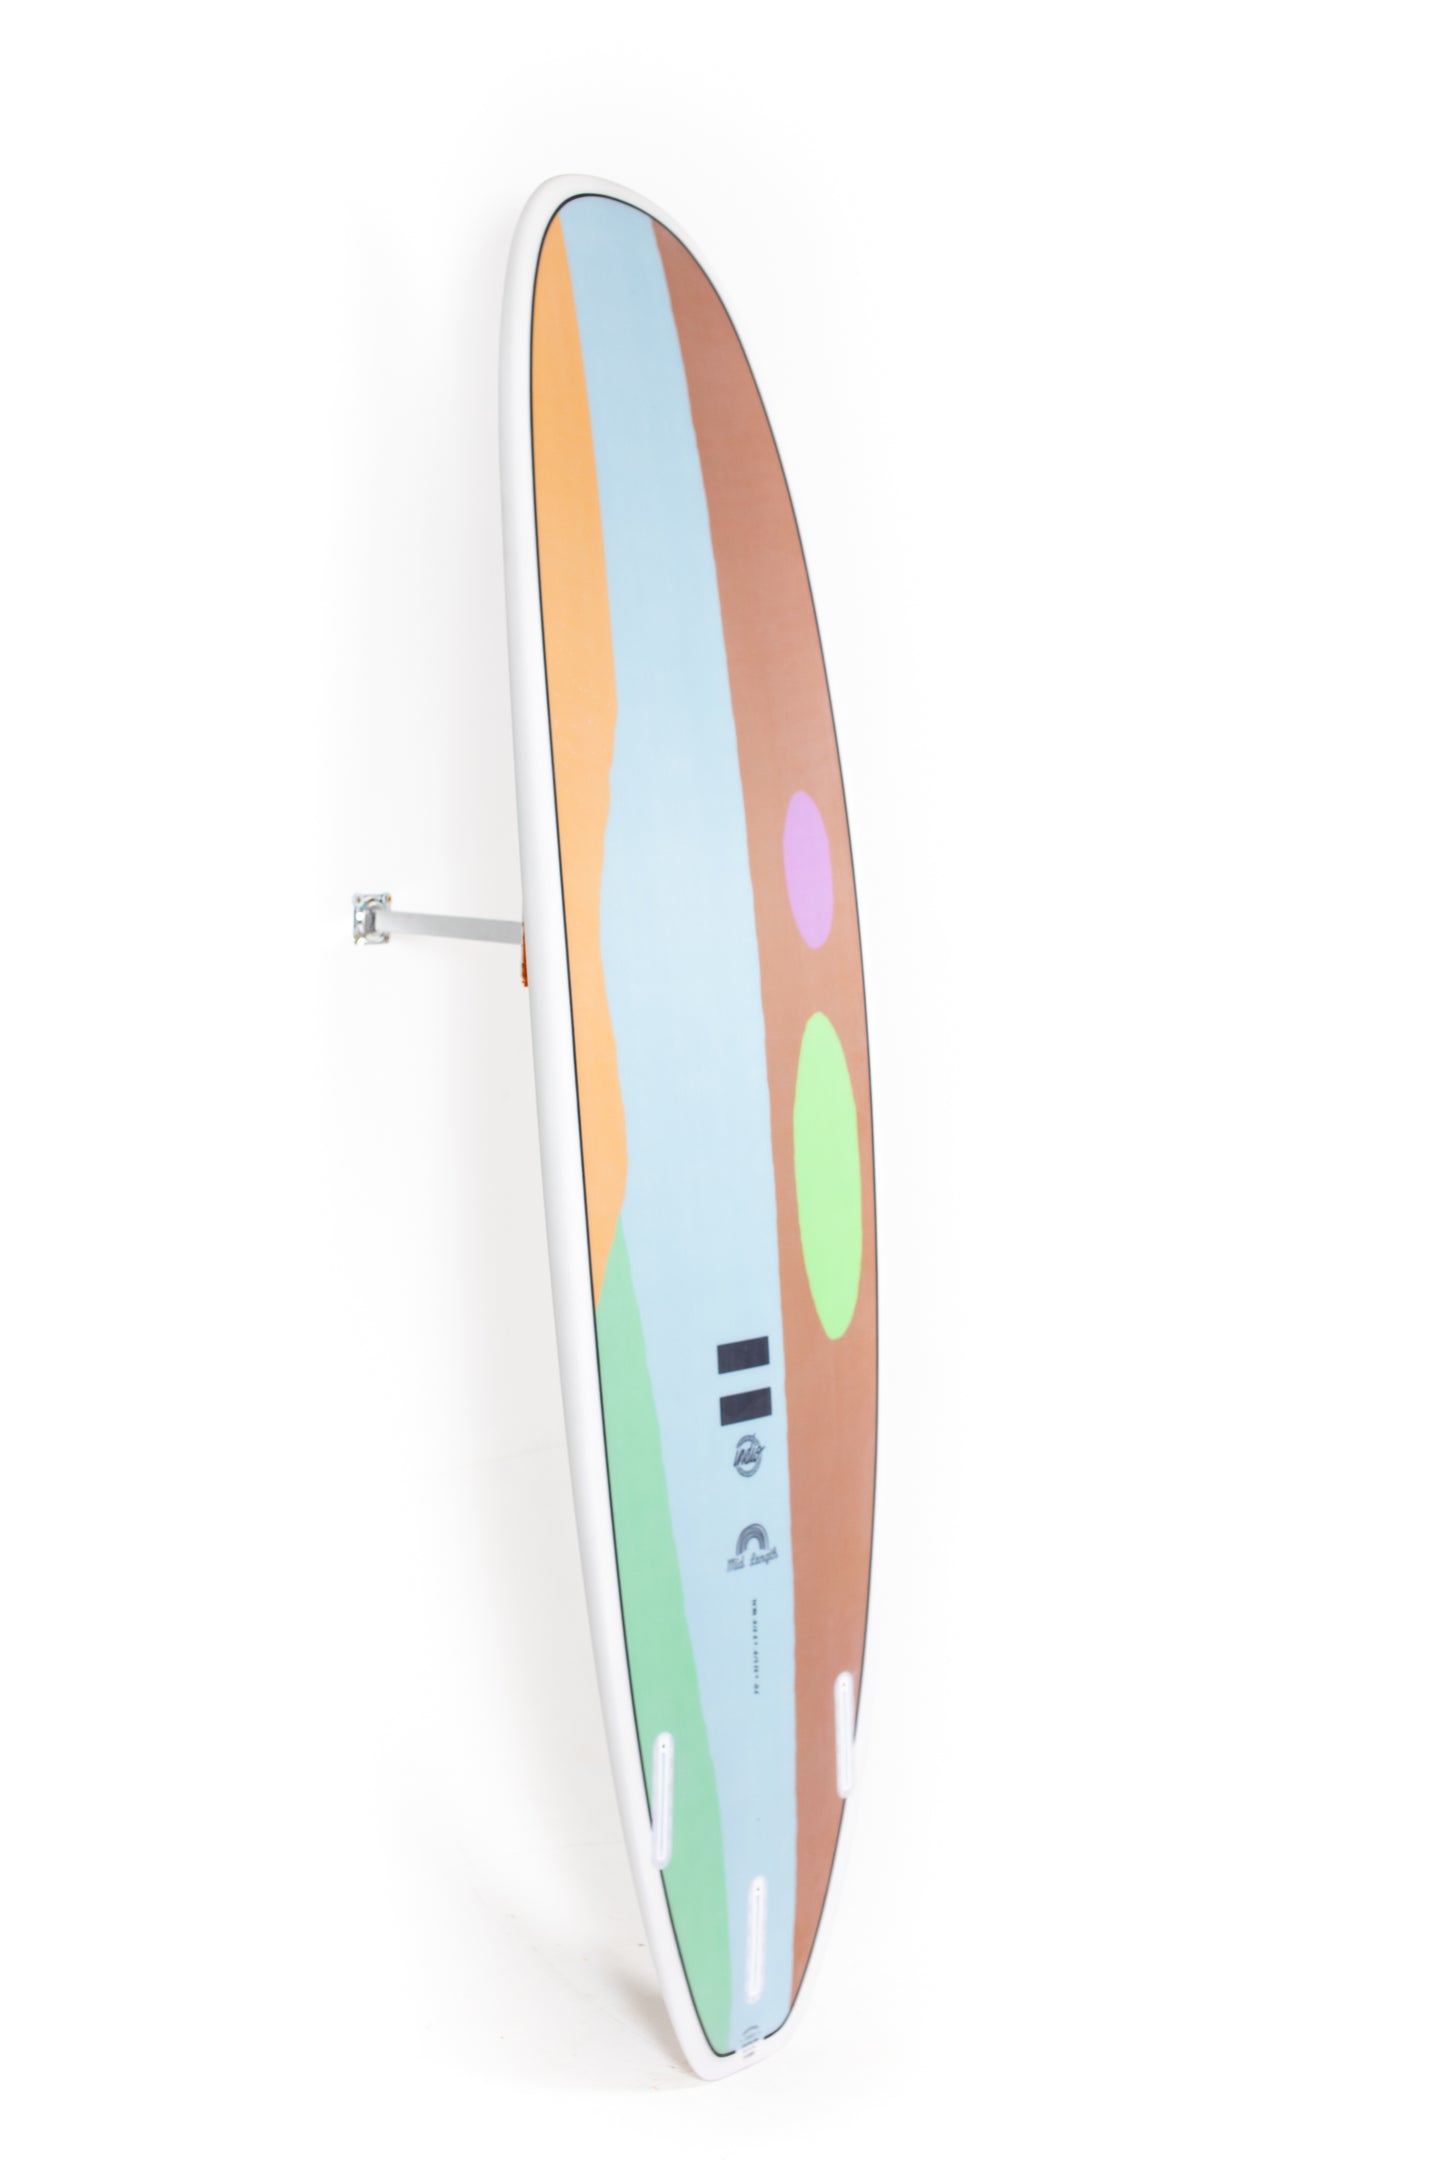 
                  
                    Pukas Surf Shop -  Indio Surfboards - MID LENGTH India 2 - 7'0" x 21 3/8 x 2 7/8 - 49,40lL
                  
                